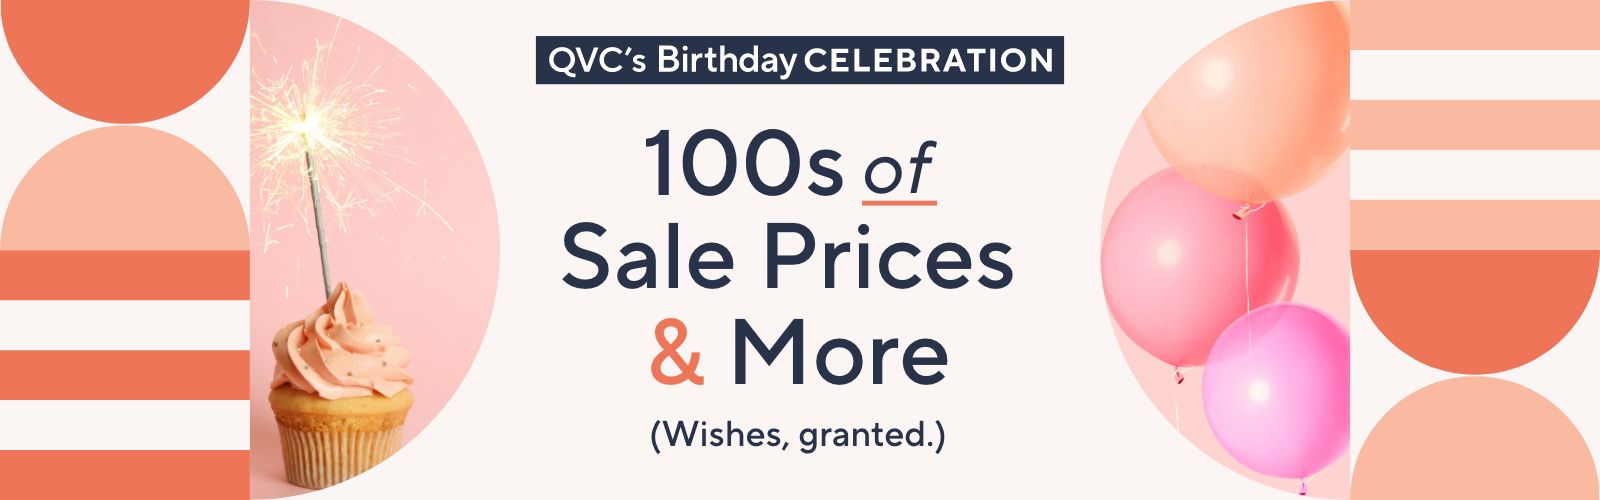 QVC’s Birthday Celebration - 100s of Sale Prices & More (Wishes, granted.)